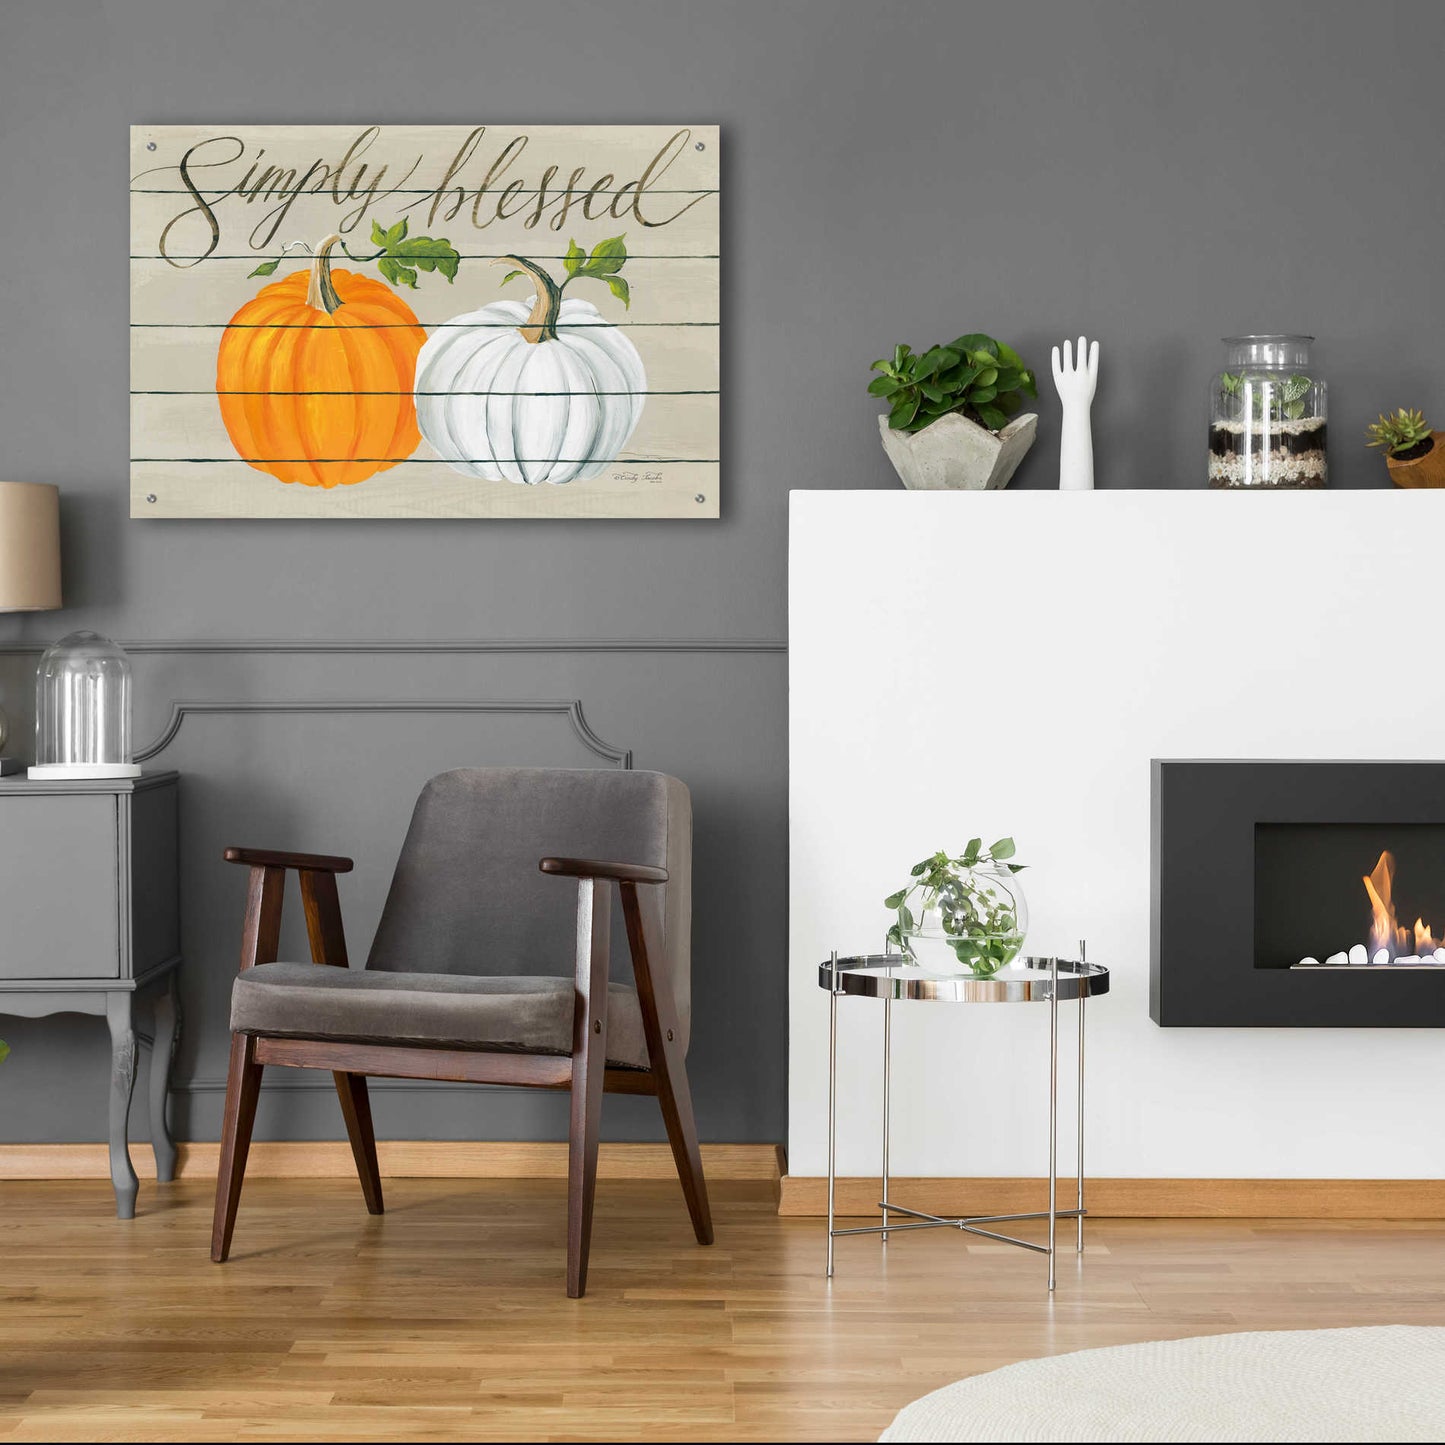 Epic Art 'Simply Blessed Pumpkins' by Cindy Jacobs, Acrylic Glass Wall Art,36x24